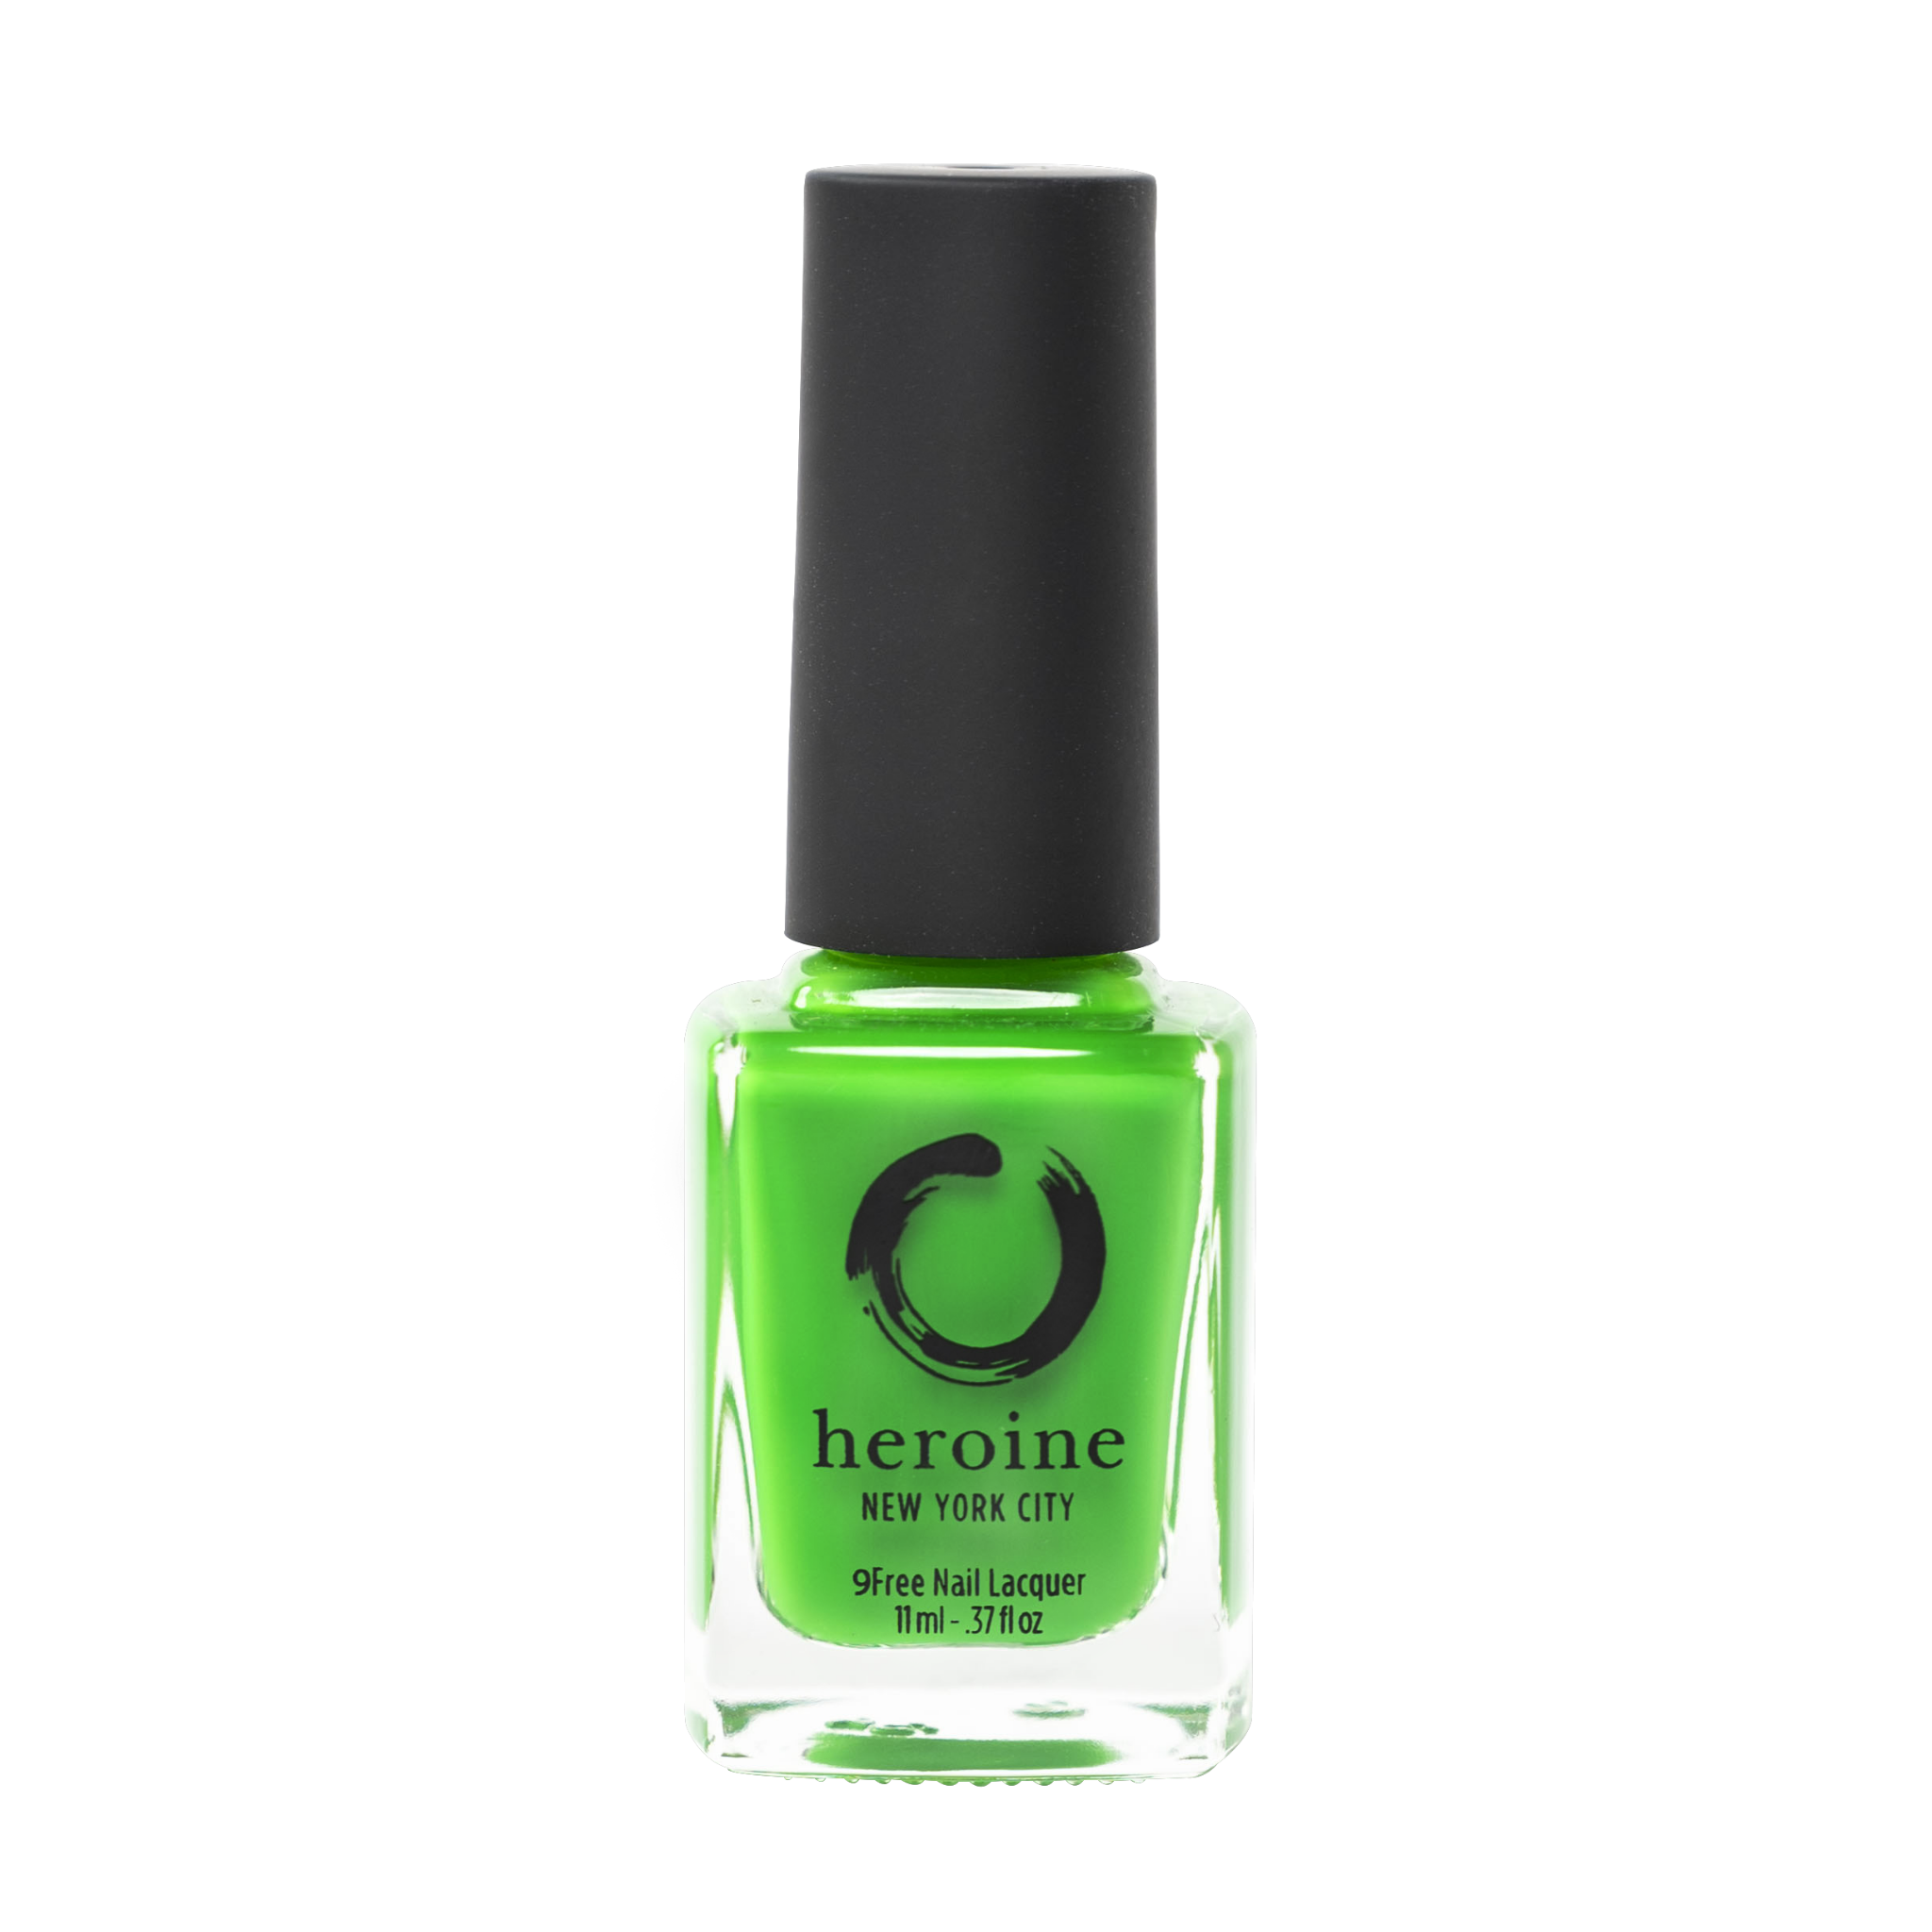 Amazon.com : heroine.nyc olive green nail polish - Cruelty-Free, Vegan and  Non-Toxic (9-free) Formula - .37 fl. oz. (11 ml) - olive green, 1 bottle-  POISON IVY : Beauty & Personal Care